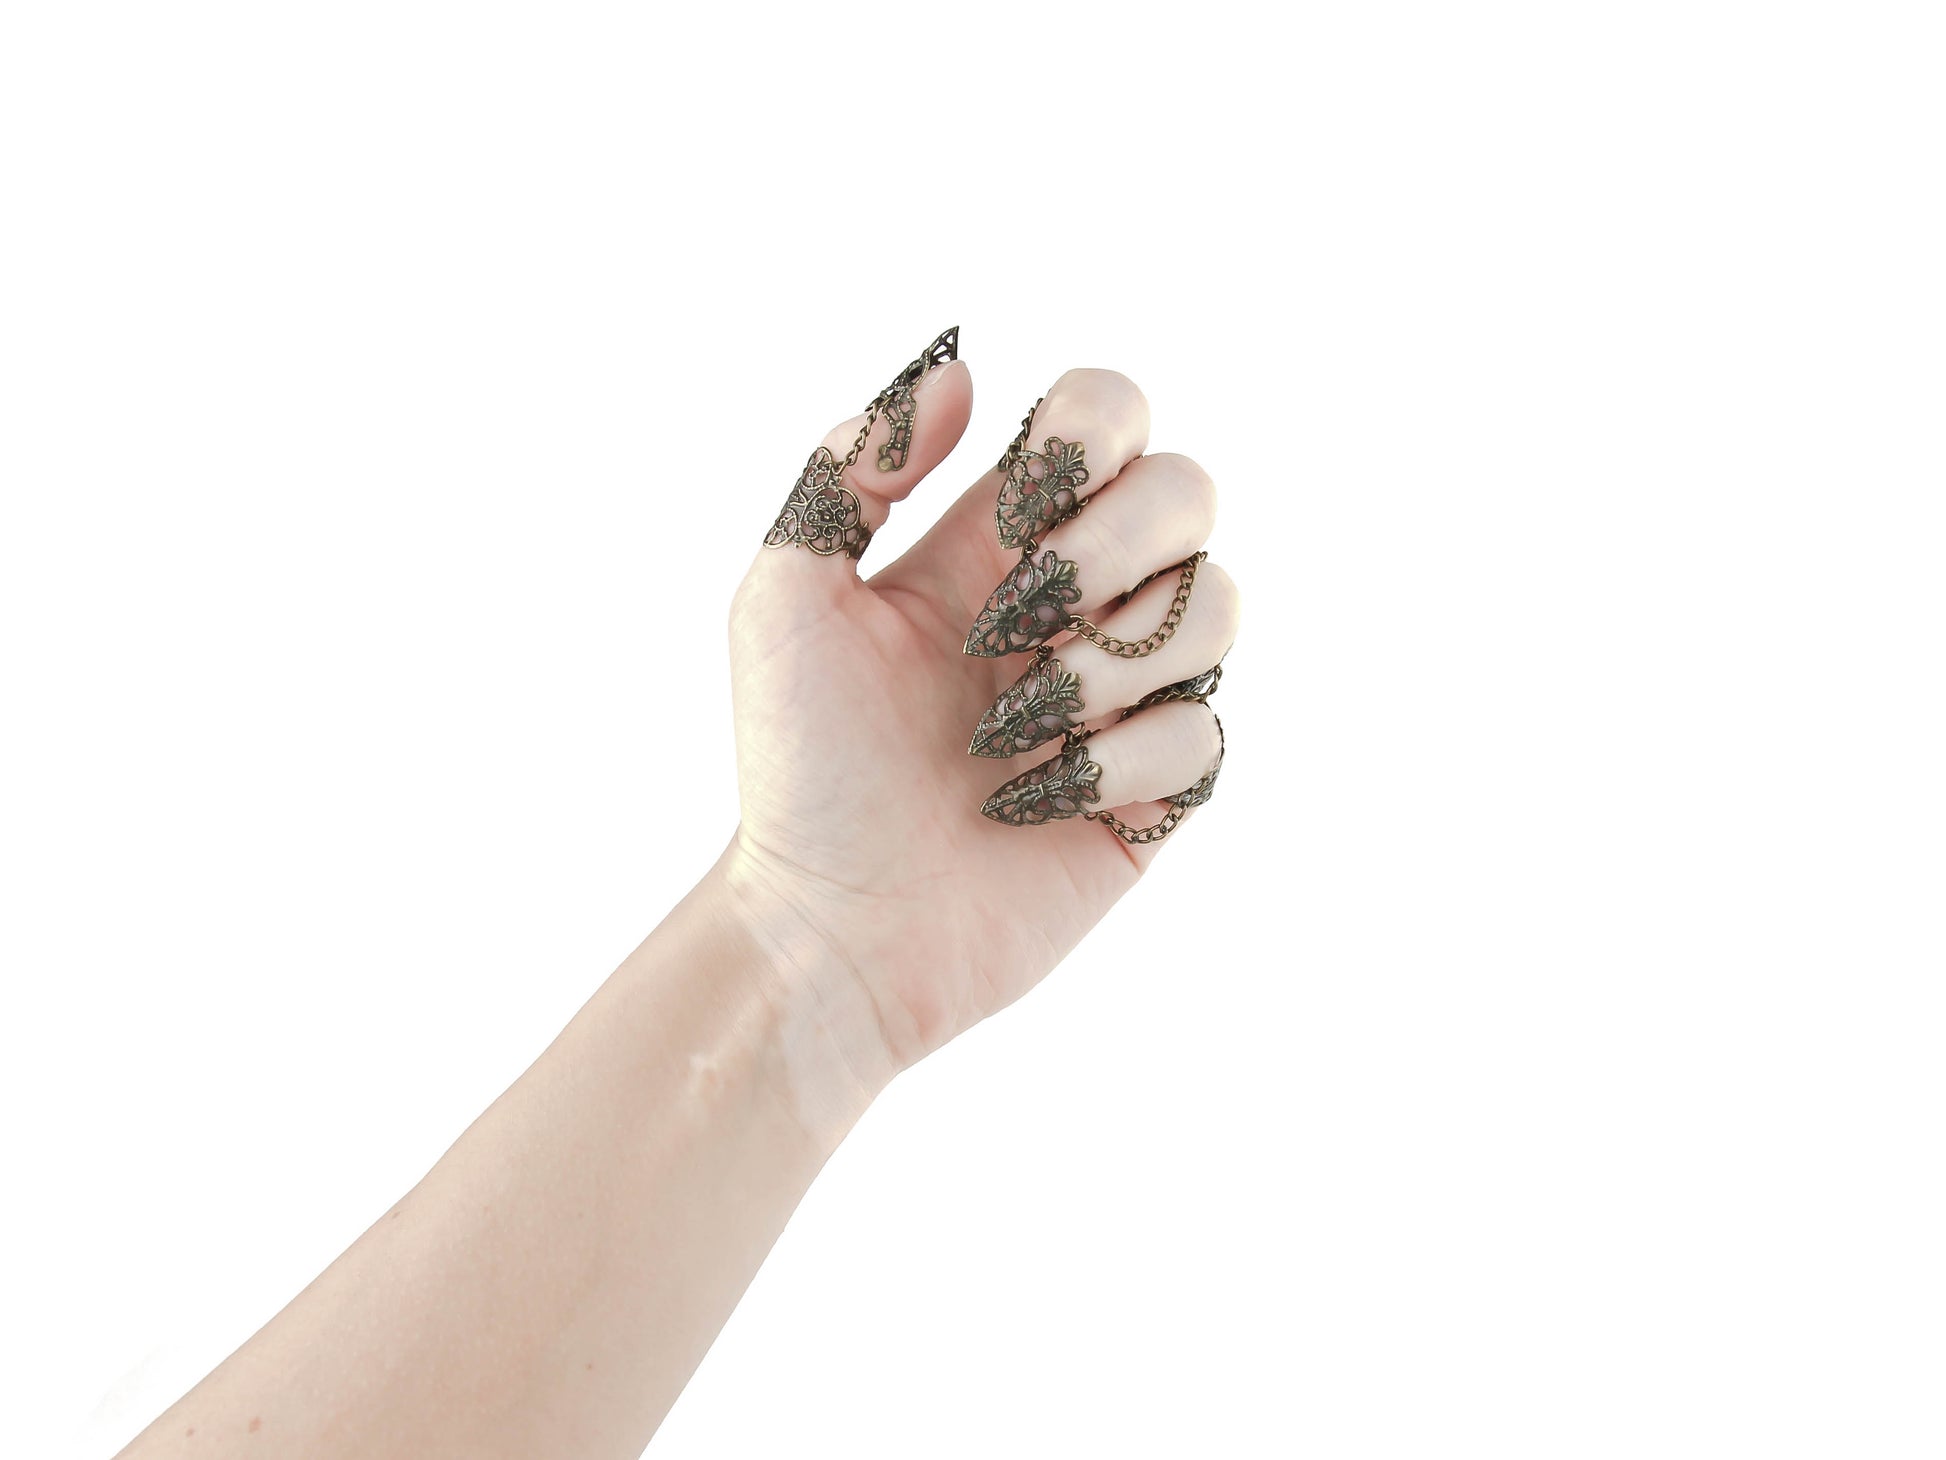 A hand elegantly displays Myril Jewels' full set of intricate bronze rings with nail claws, perfect for neo-gothic style enthusiasts. The exquisite craftsmanship is ideal for Halloween, punk fashion statements, or as a standout accessory for whimsigoth and witchcore looks, also making a memorable gift for a goth girlfriend.